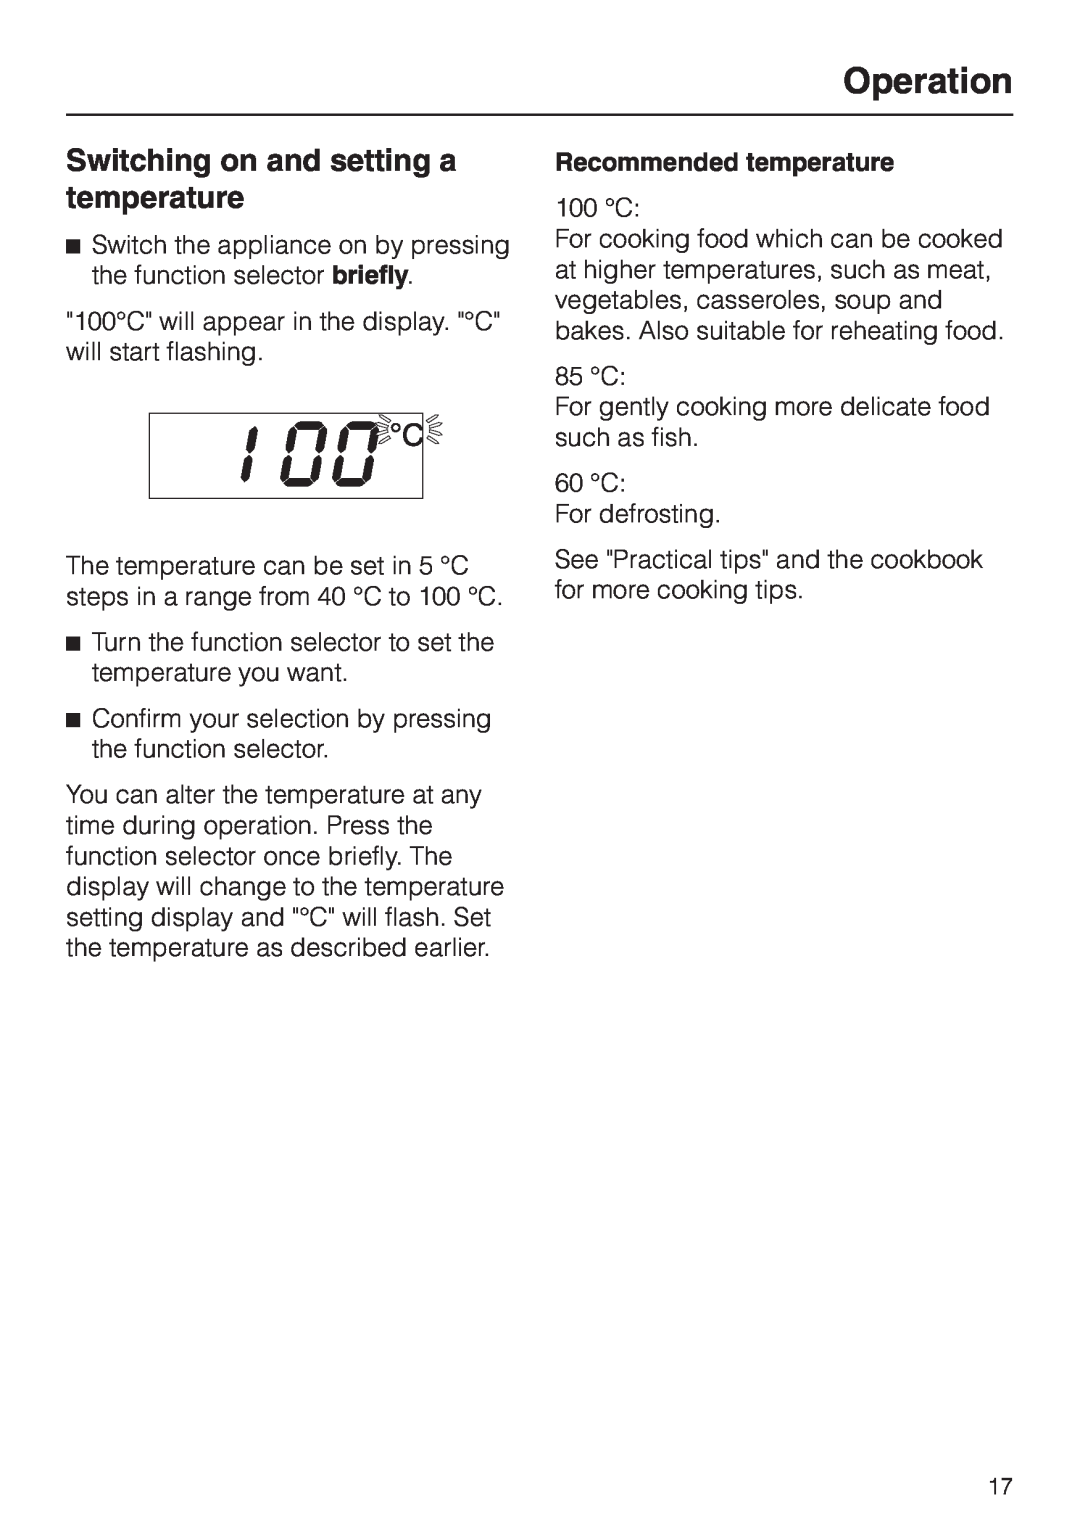 Miele DG 1050 manual Switching on and setting a temperature, Operation, Recommended temperature 